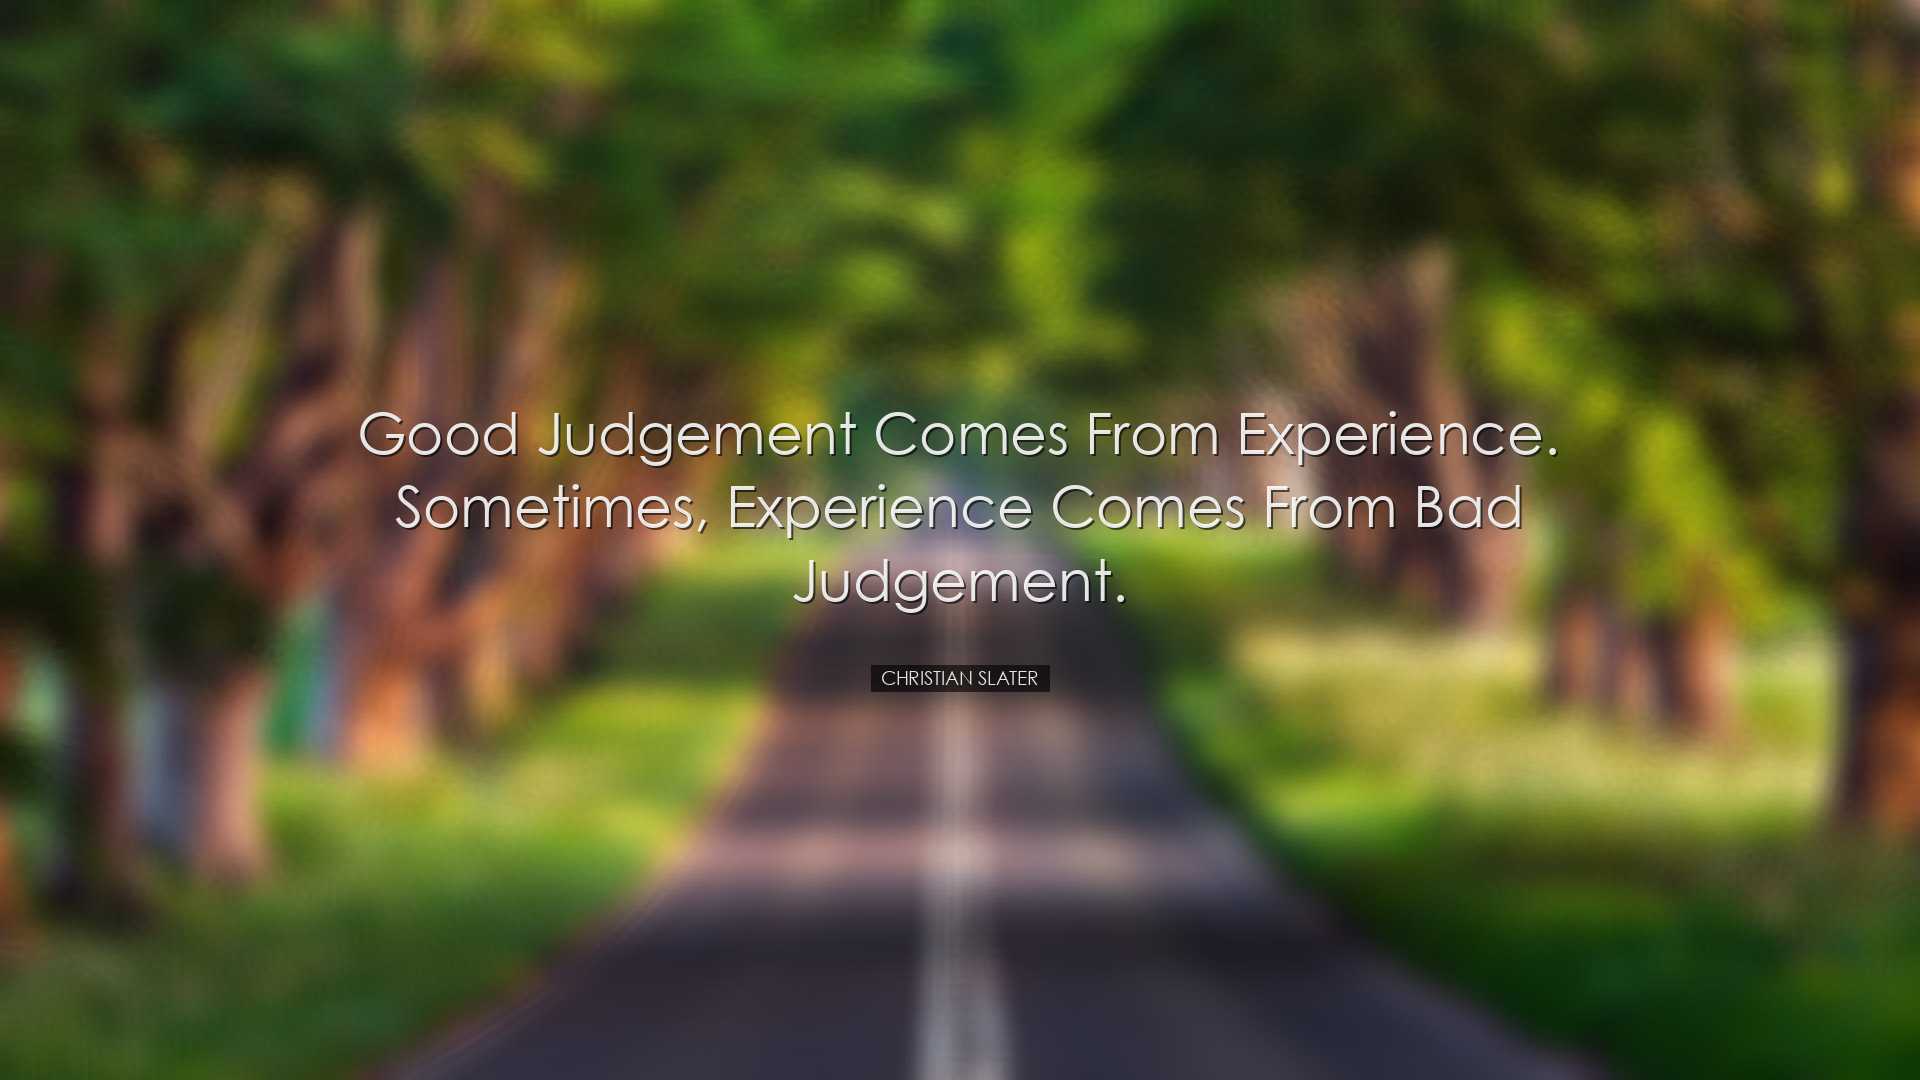 Good judgement comes from experience. Sometimes, experience comes